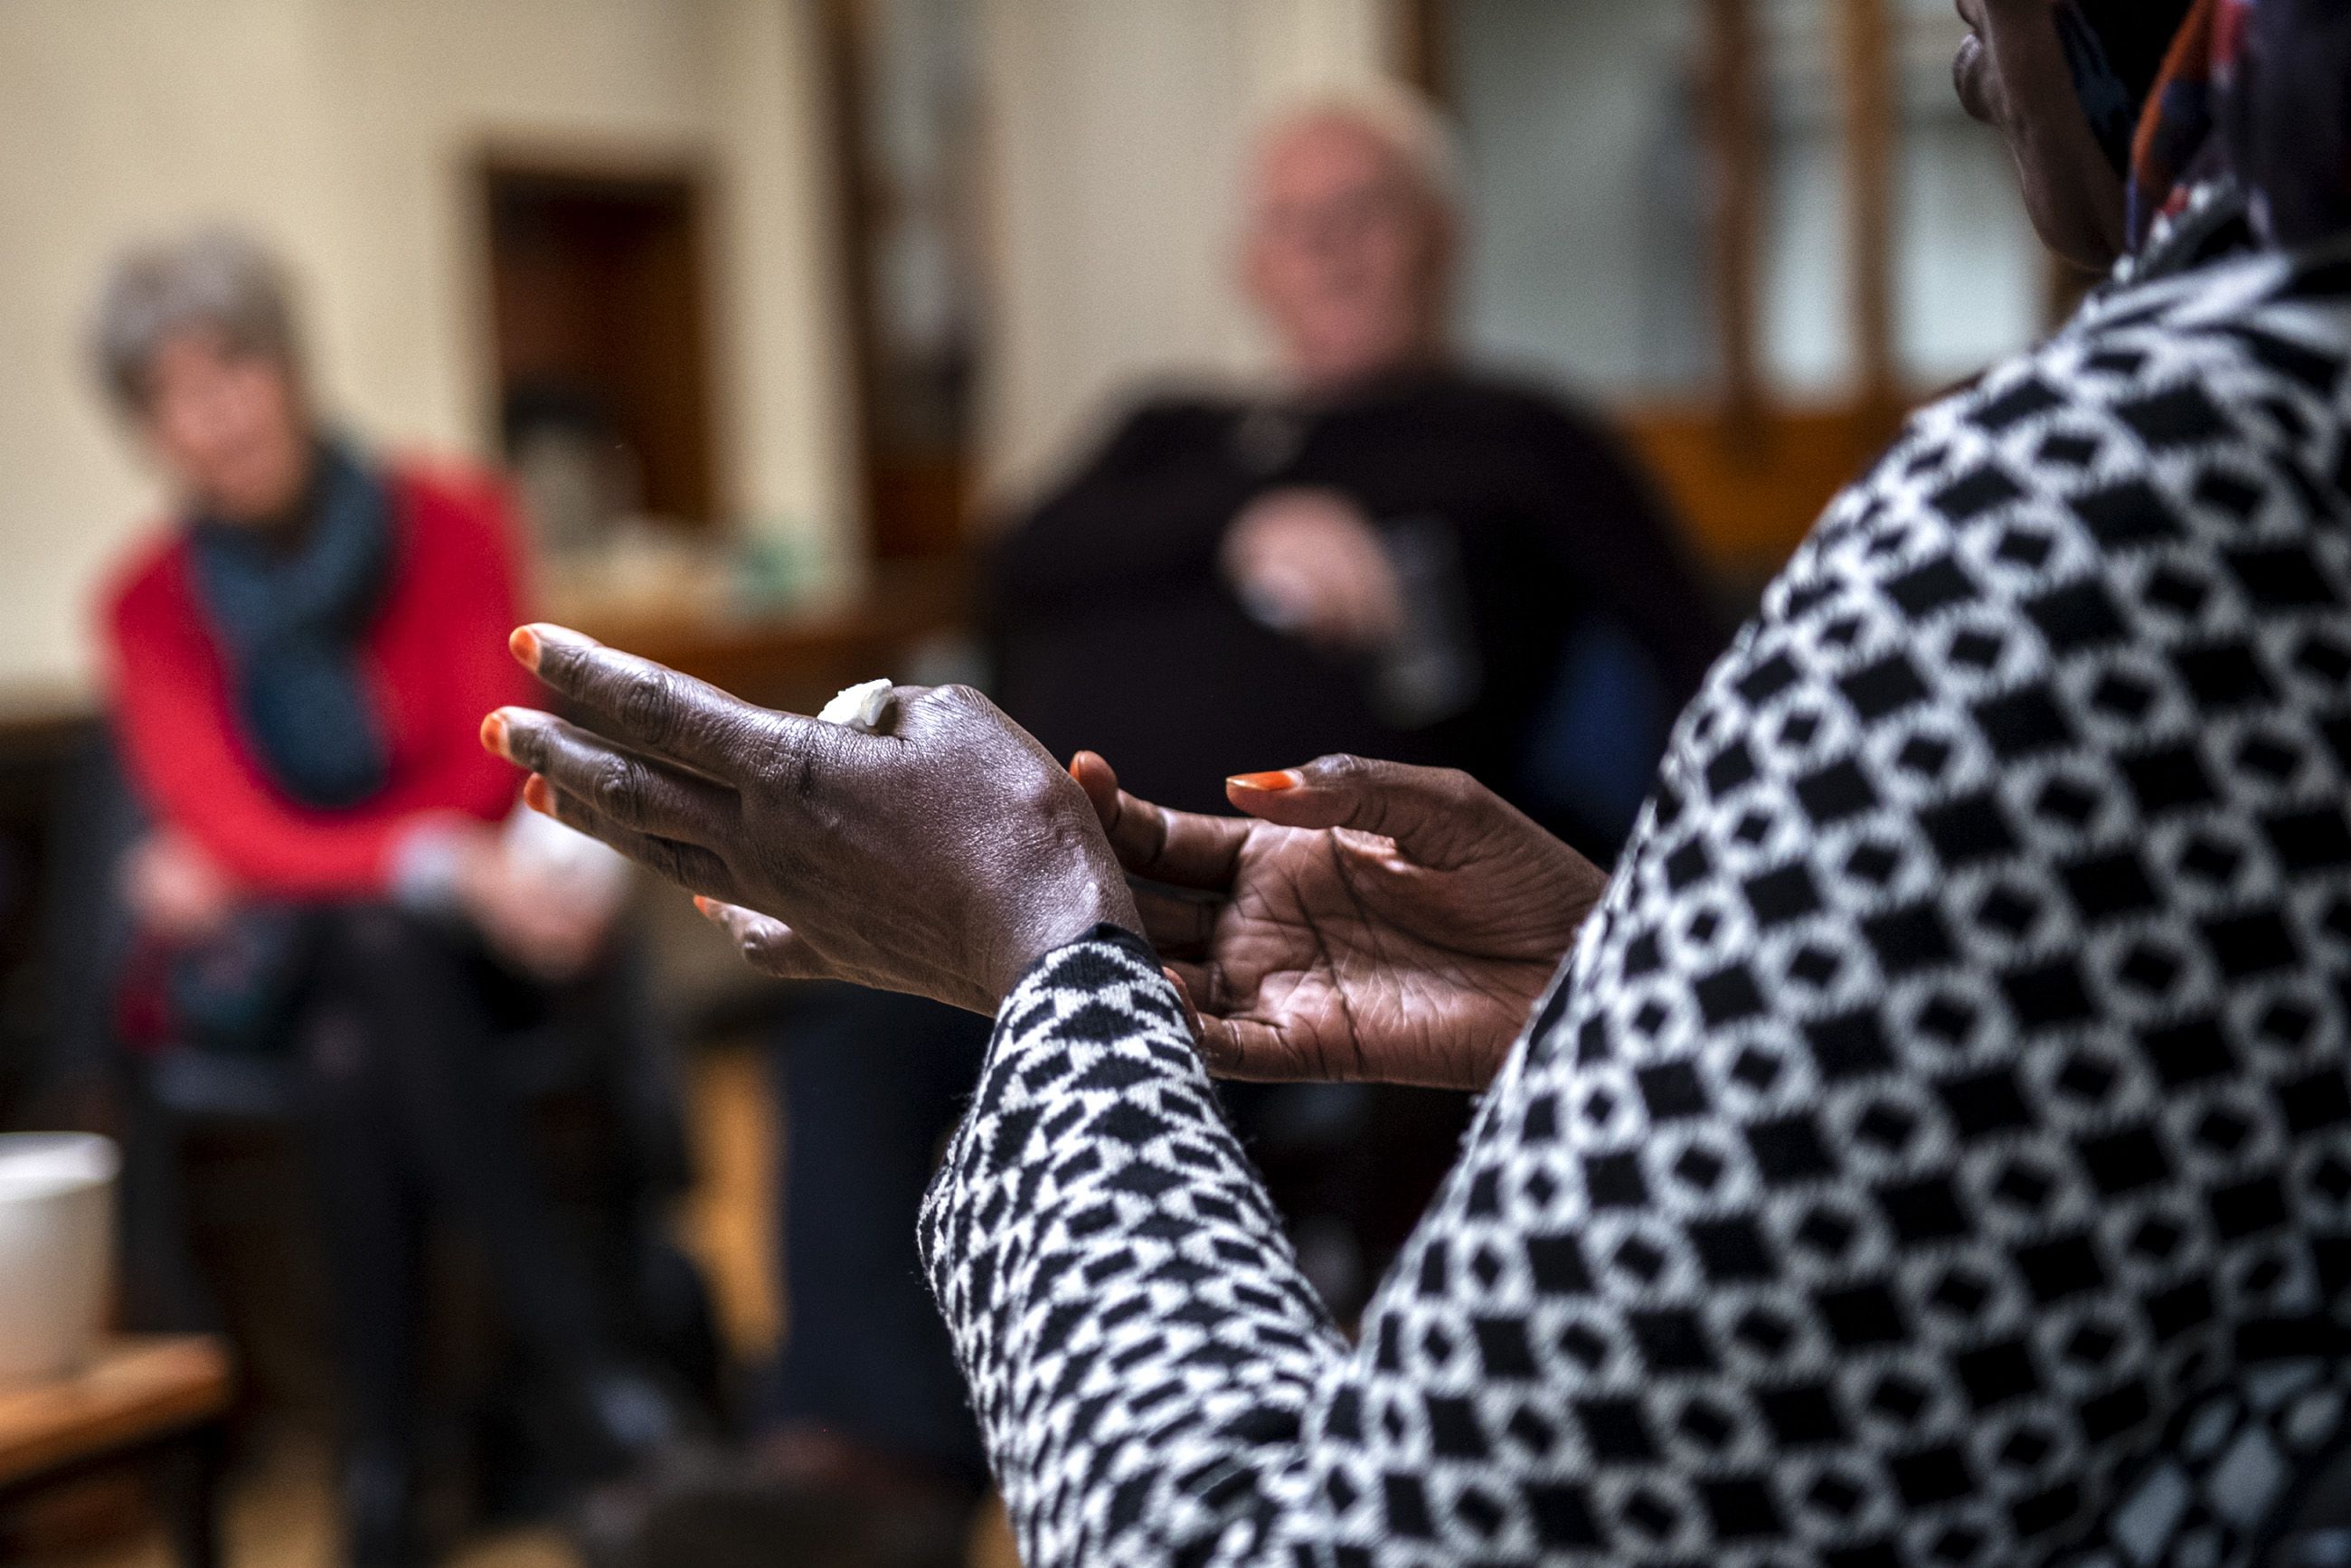 Sadia Ahamed, of City Centre, speaks during the monthly Poverty Truth Community meeting. Image by Michael Santiago. United Kingdom, 2019.